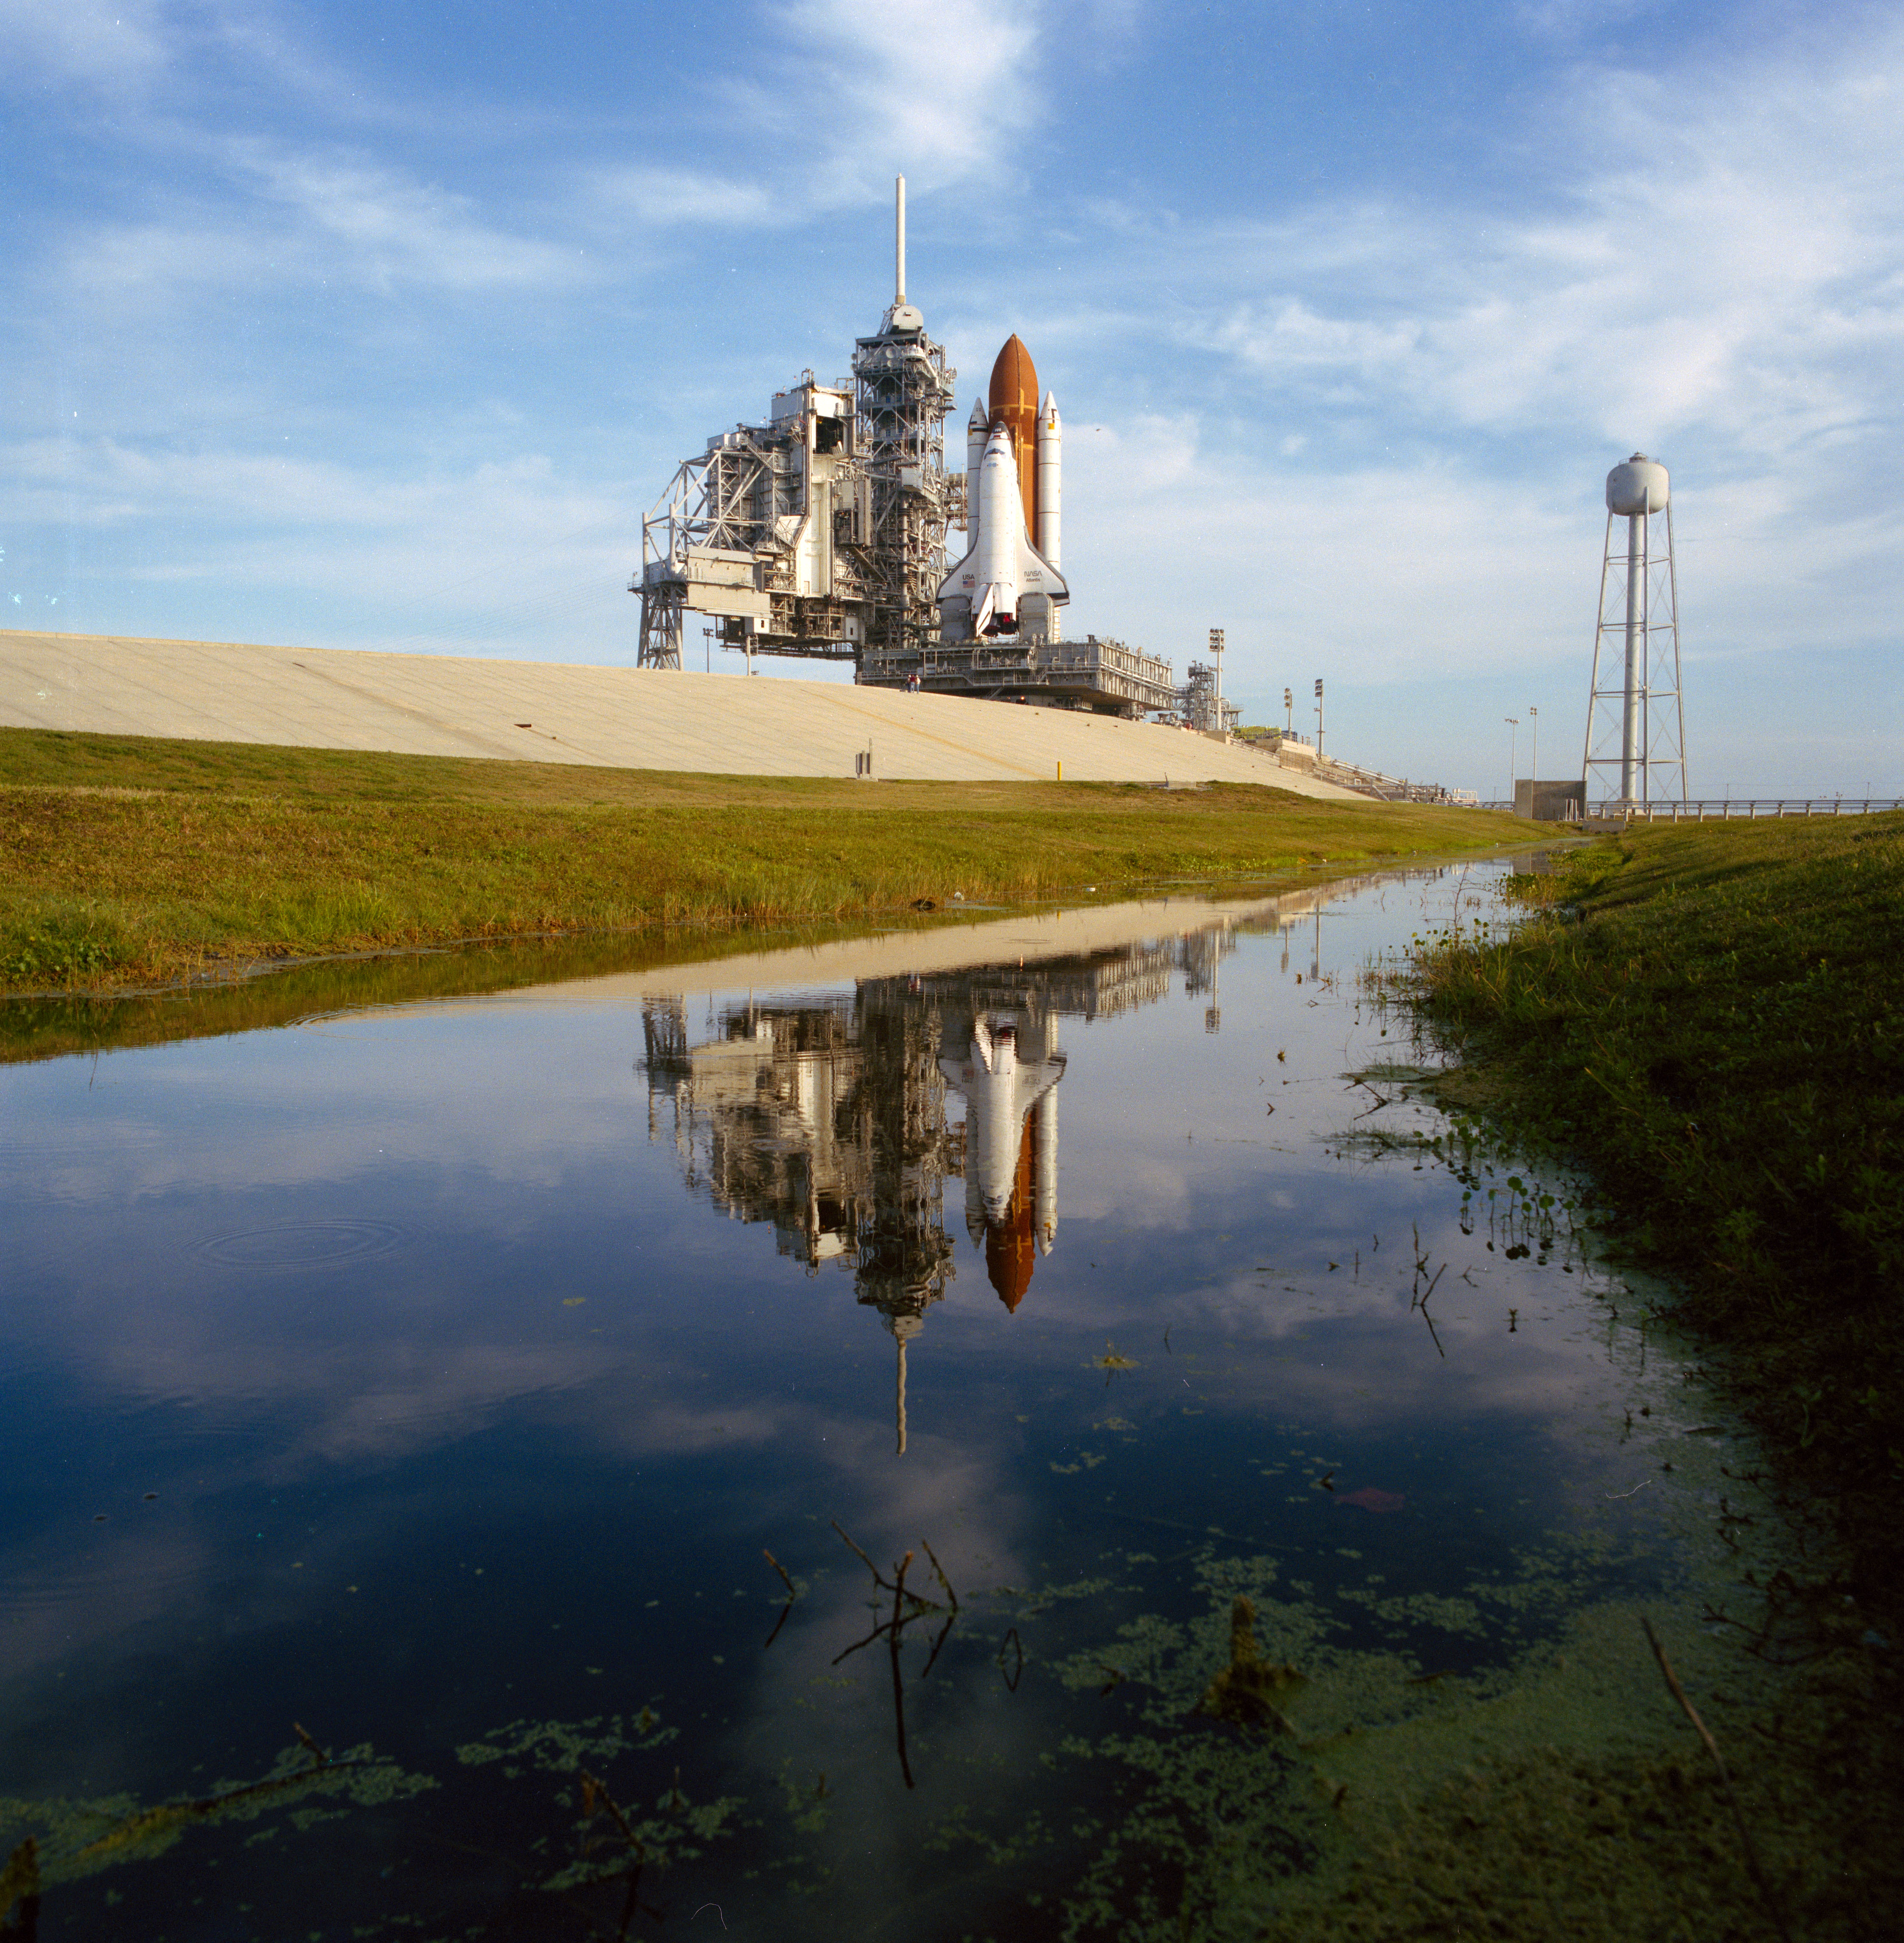 NASA Space Technology Place shuttle Atlantis arrives at Launch Pad 39B